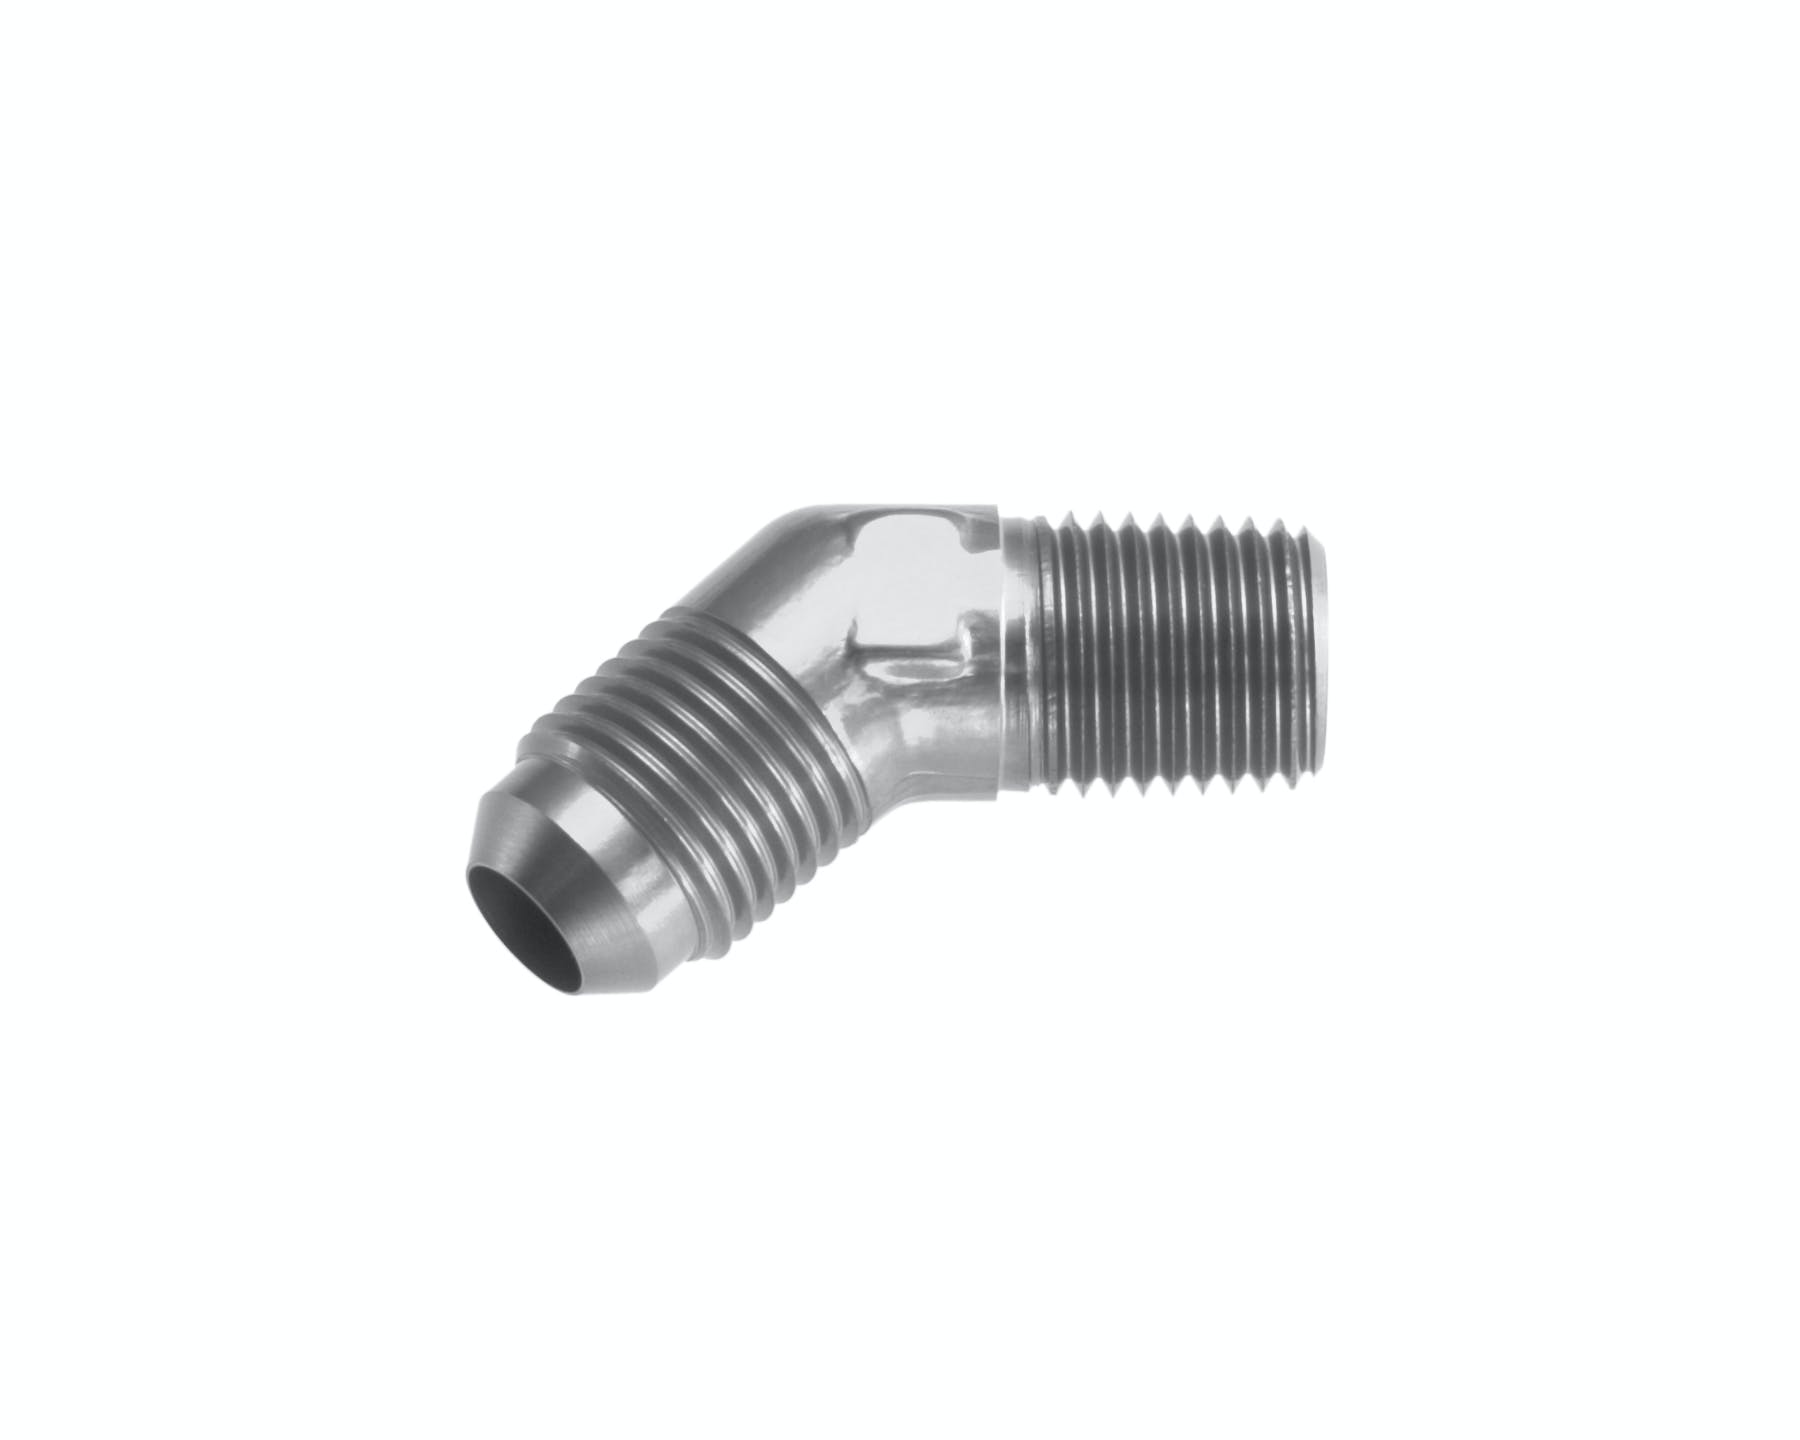 Redhorse Performance 823-03-02-5 -03 45 degree Male adapter to -02 (1/8in) NPT Male - clear